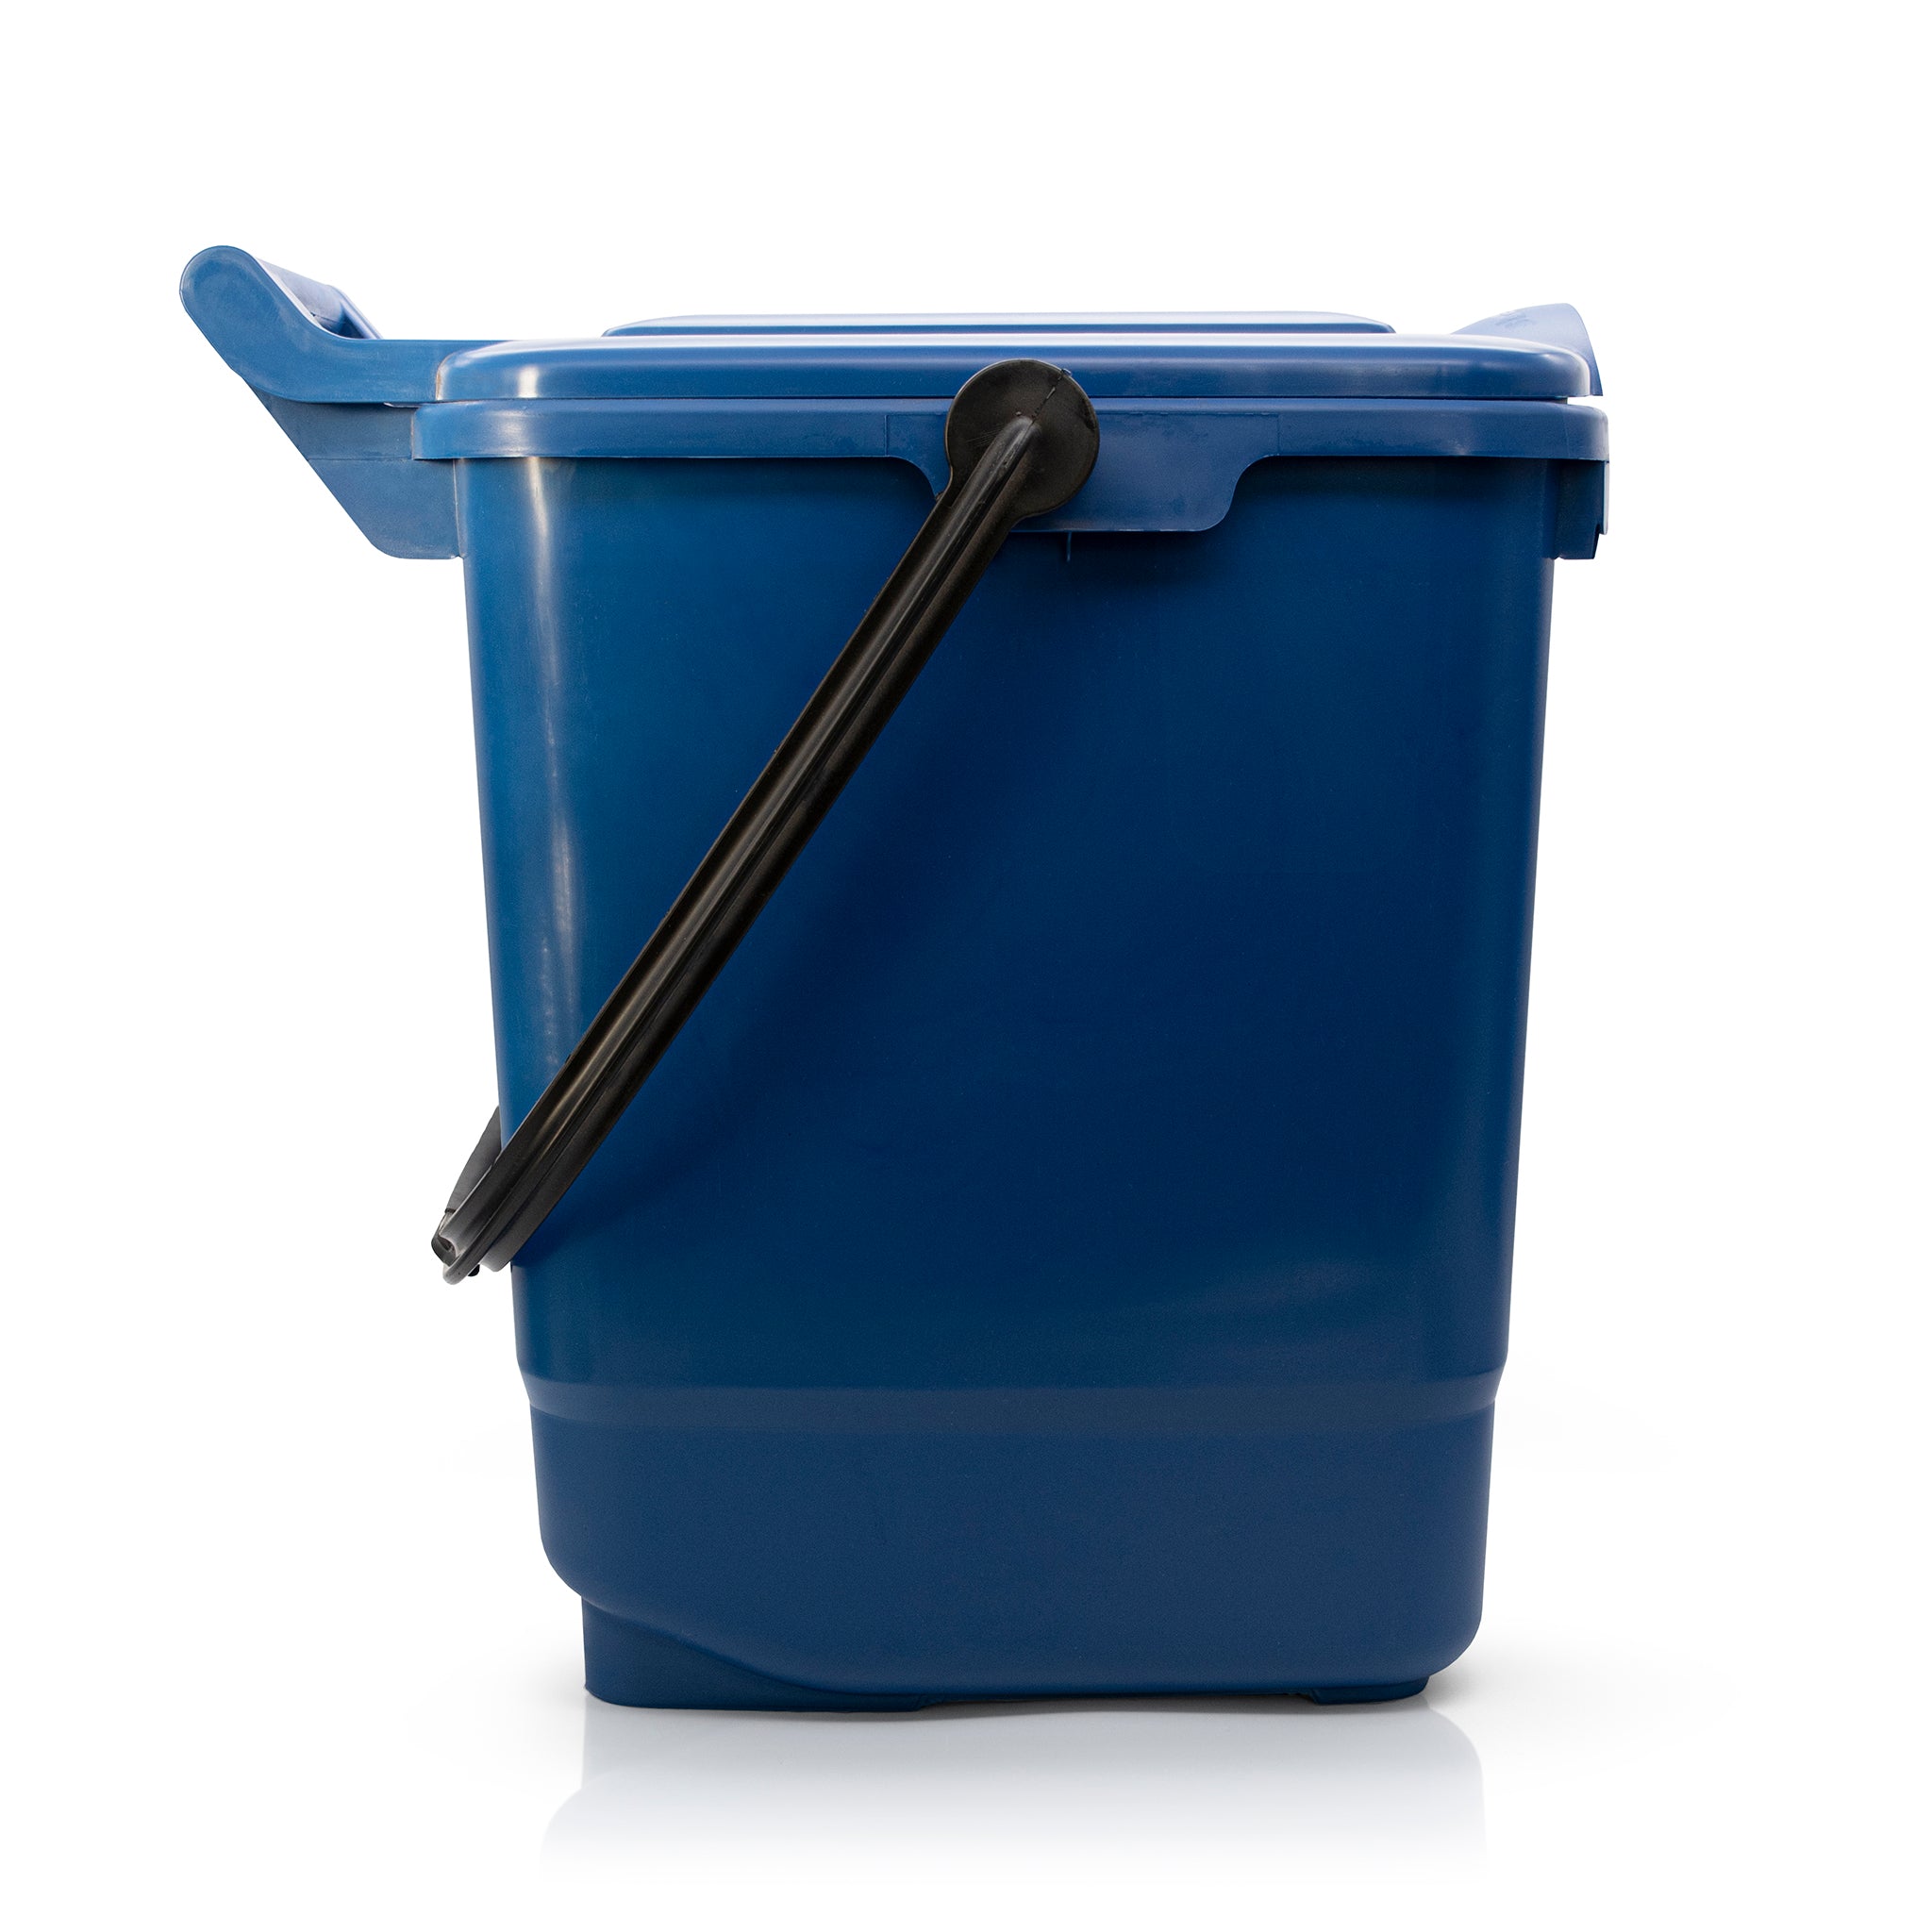 Blue compost bin with locking lid made from 100% recycled plastic materials